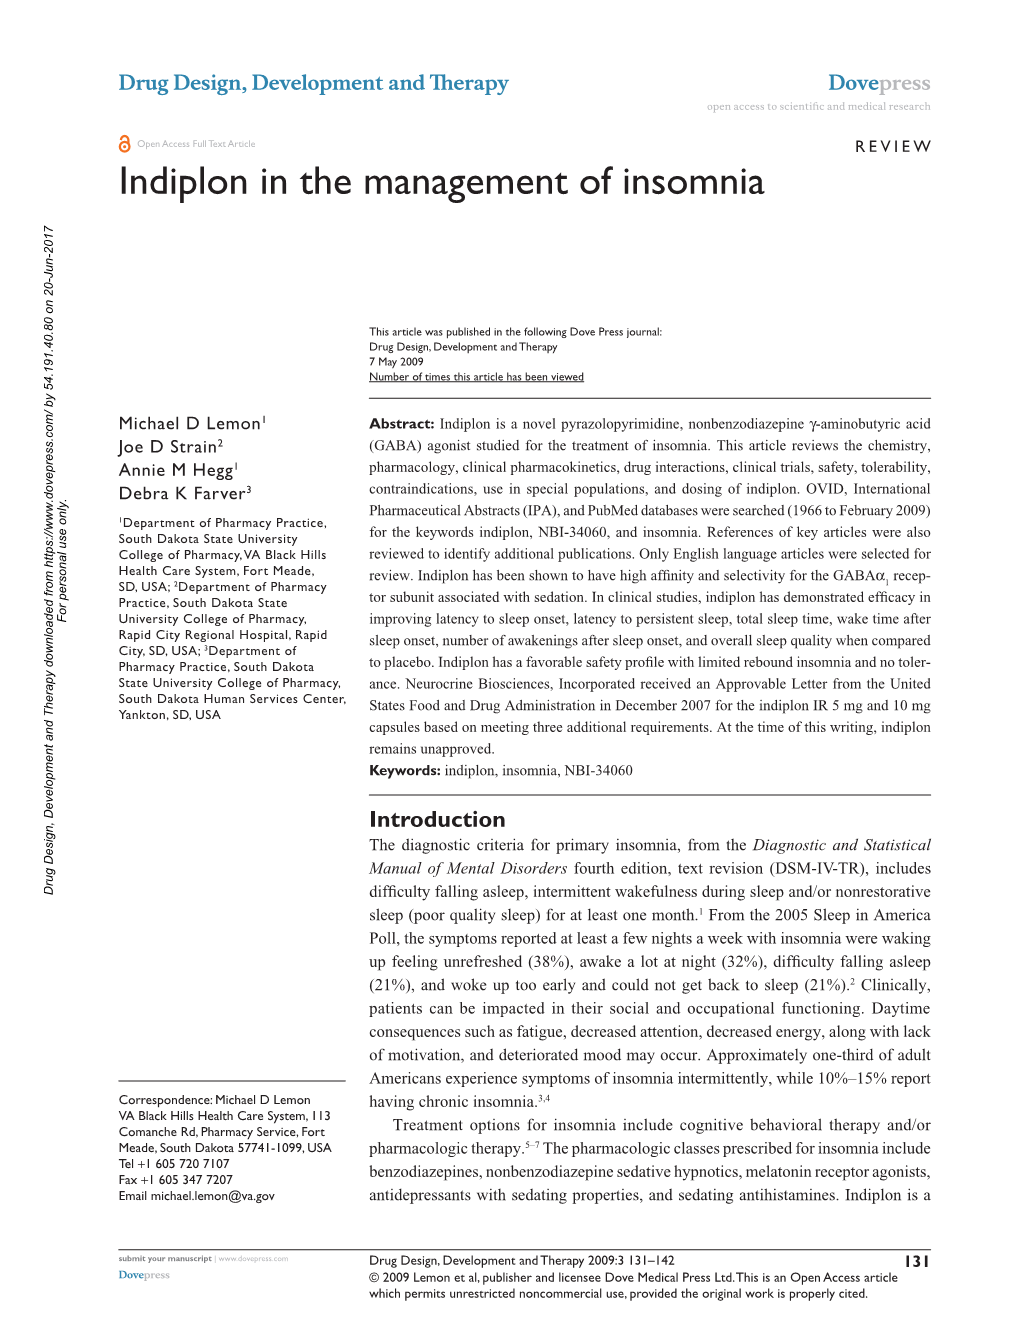 Indiplon in the Management of Insomnia